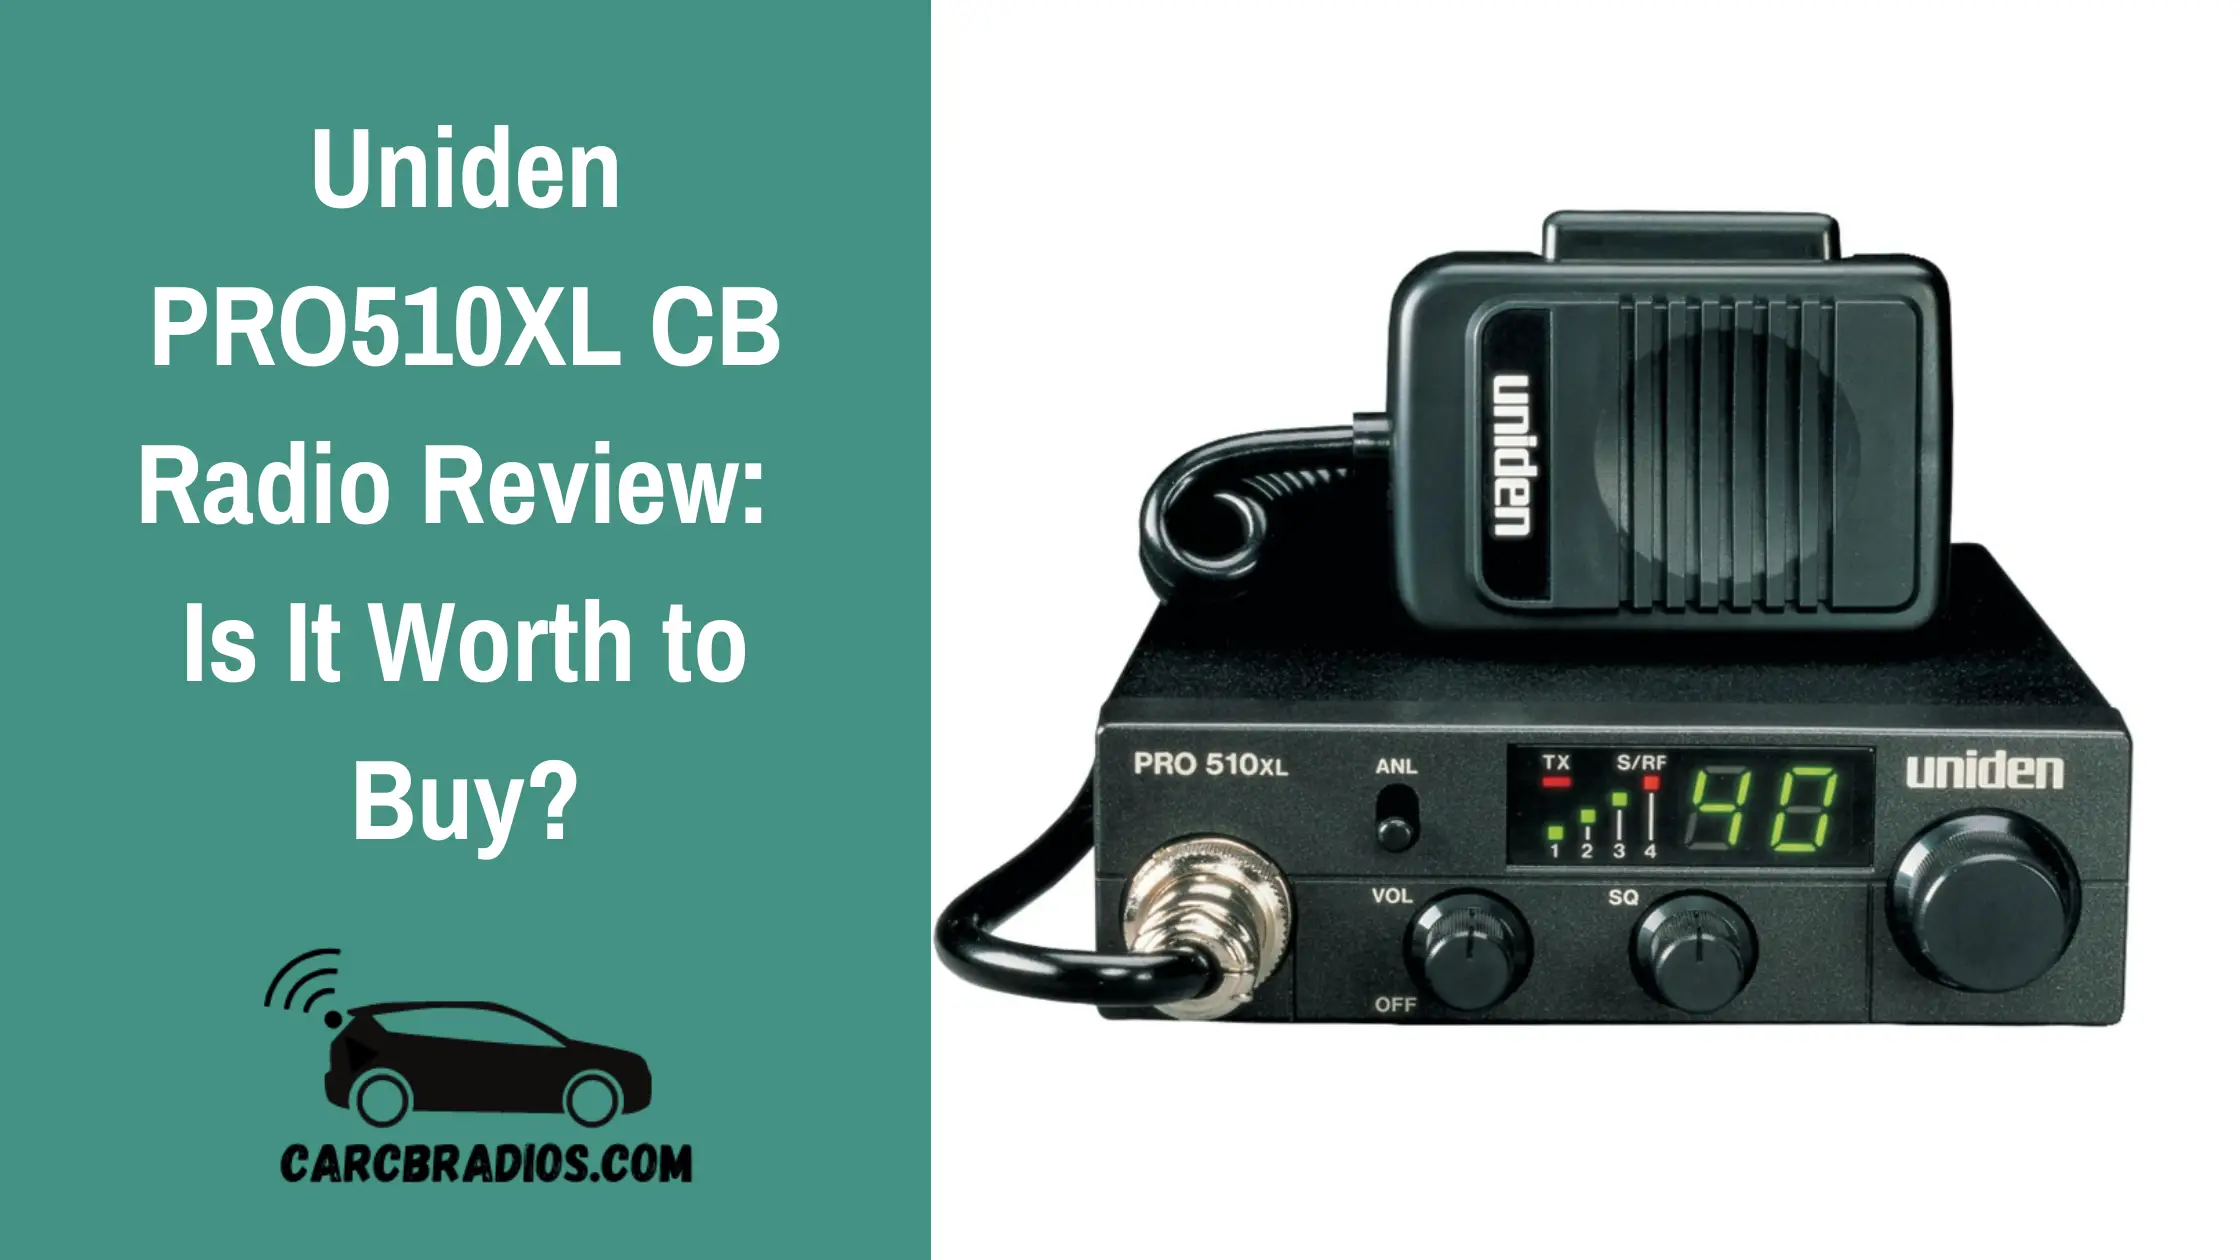 Uniden PRO510XL CB Radio Review: Is It Worth to Buy?